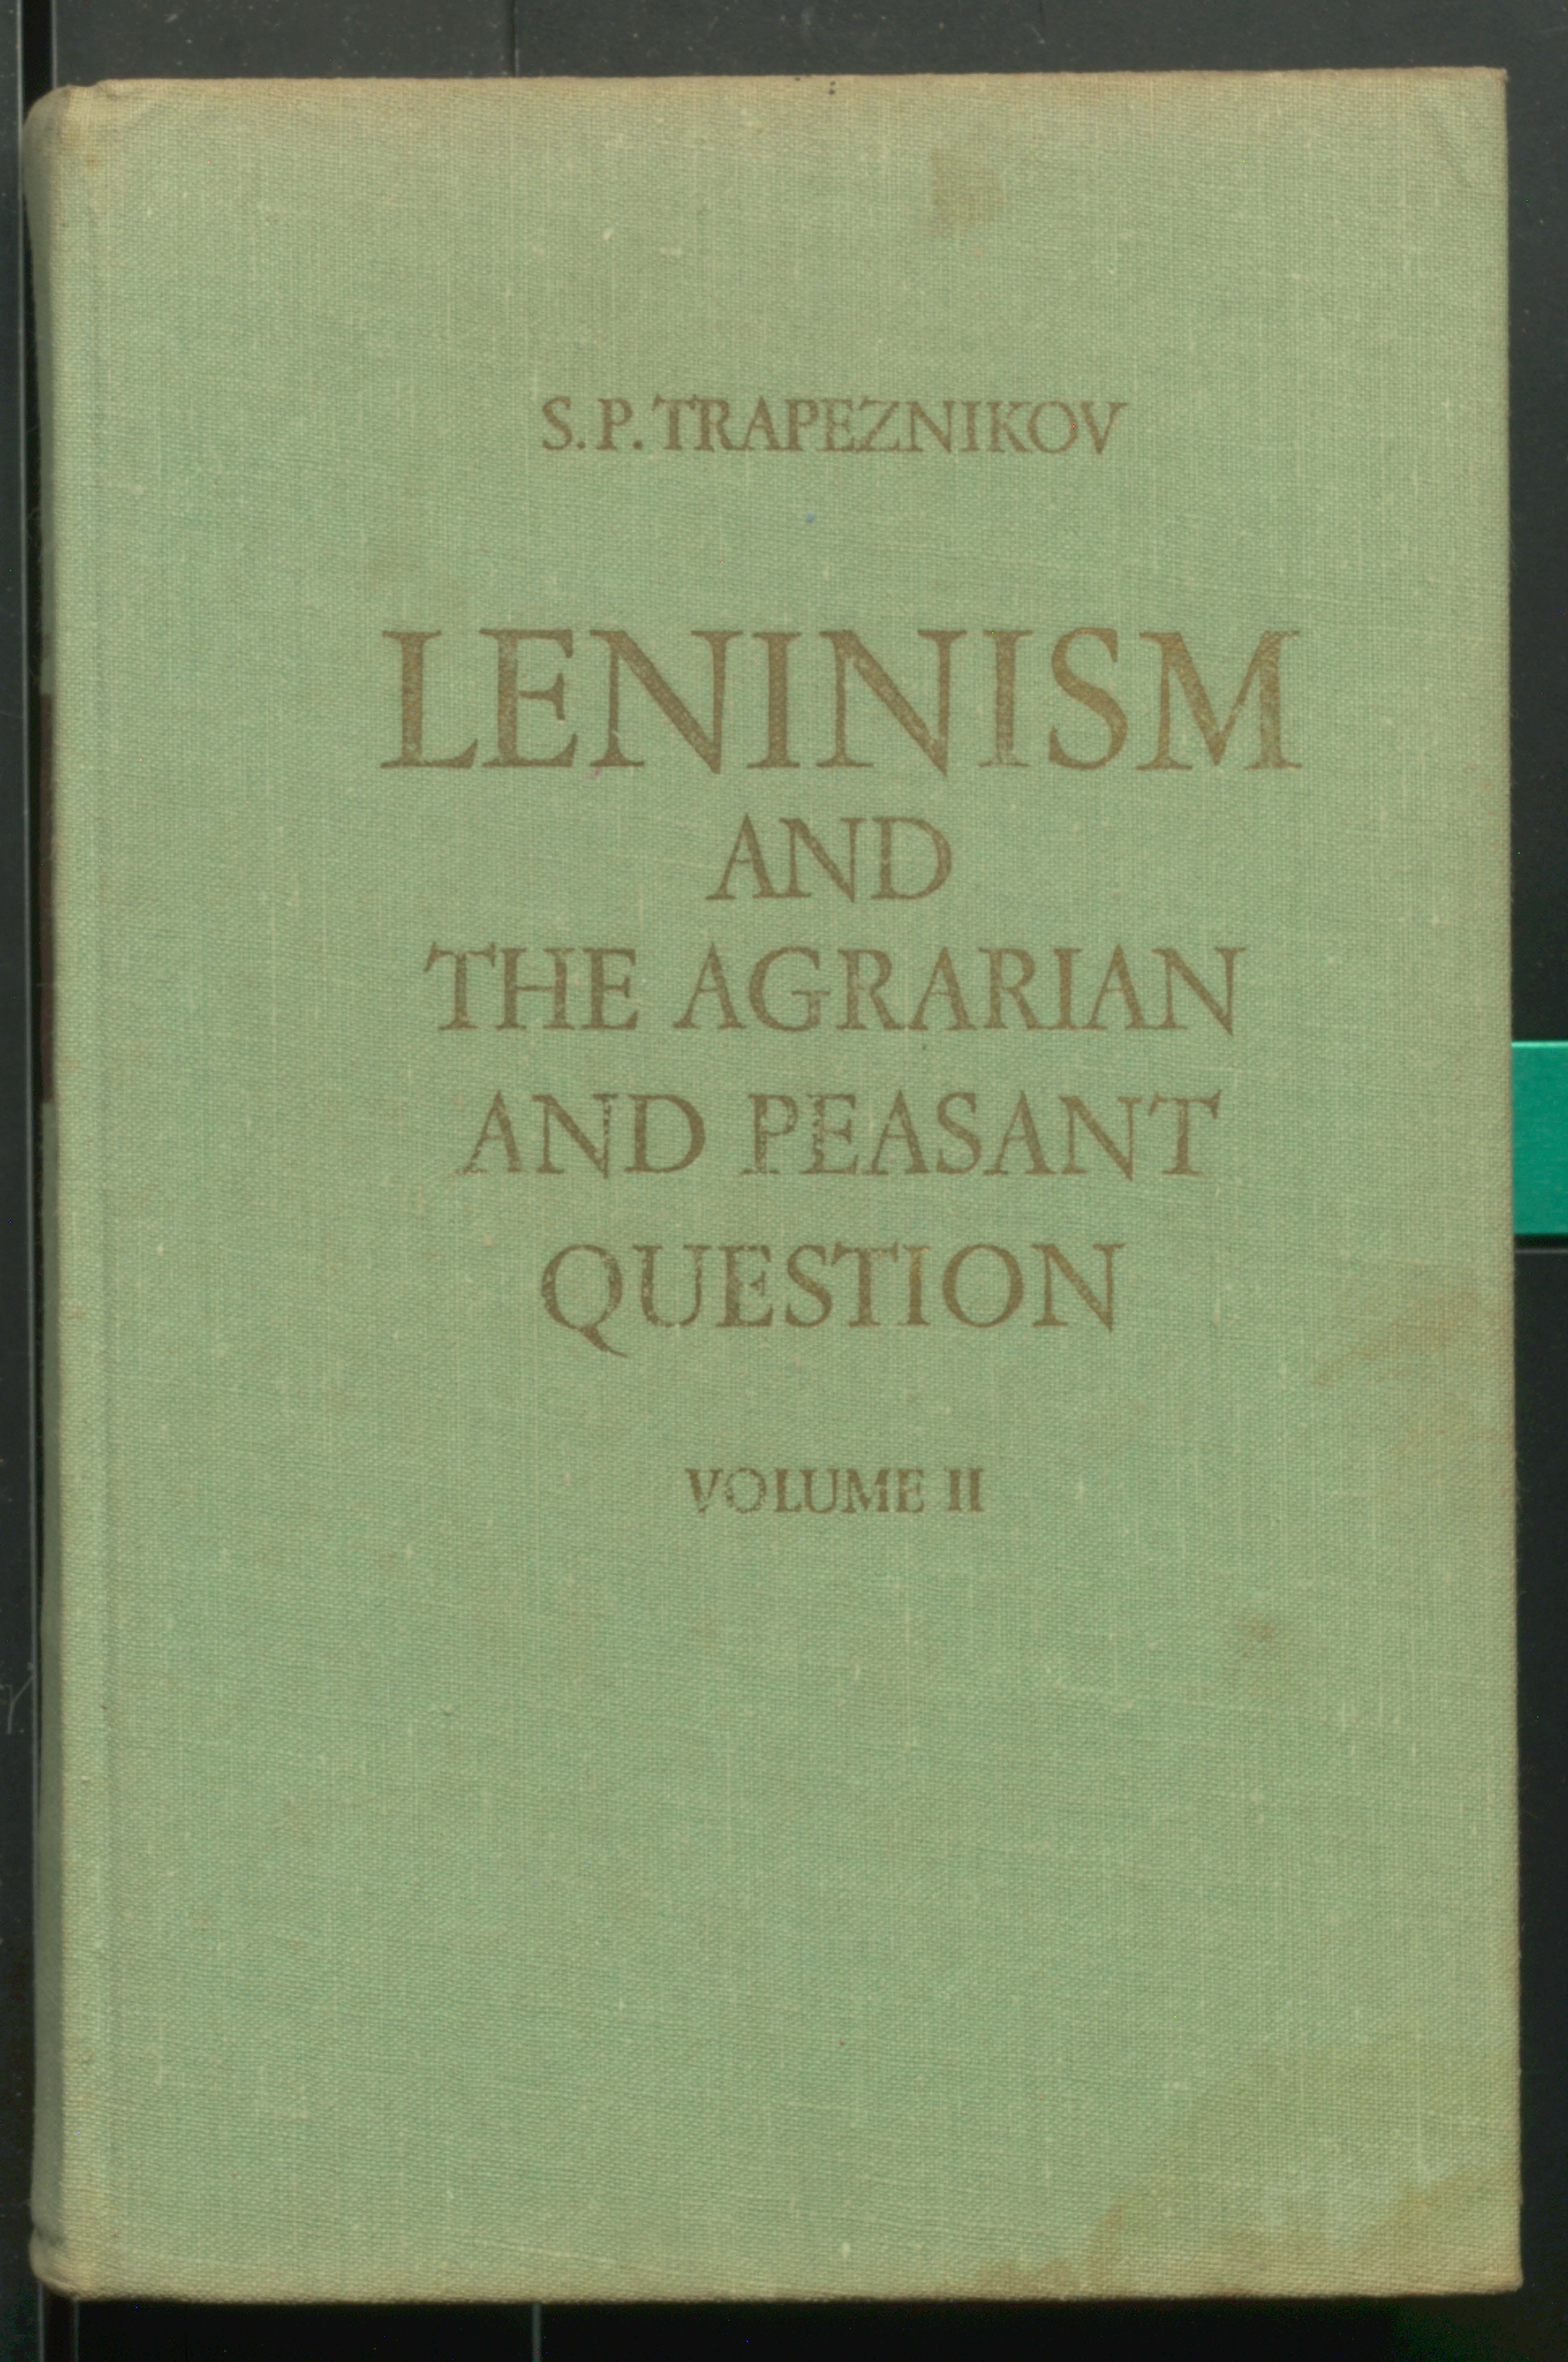 Leninism and the  agrarian and peasant question (volume-ll)